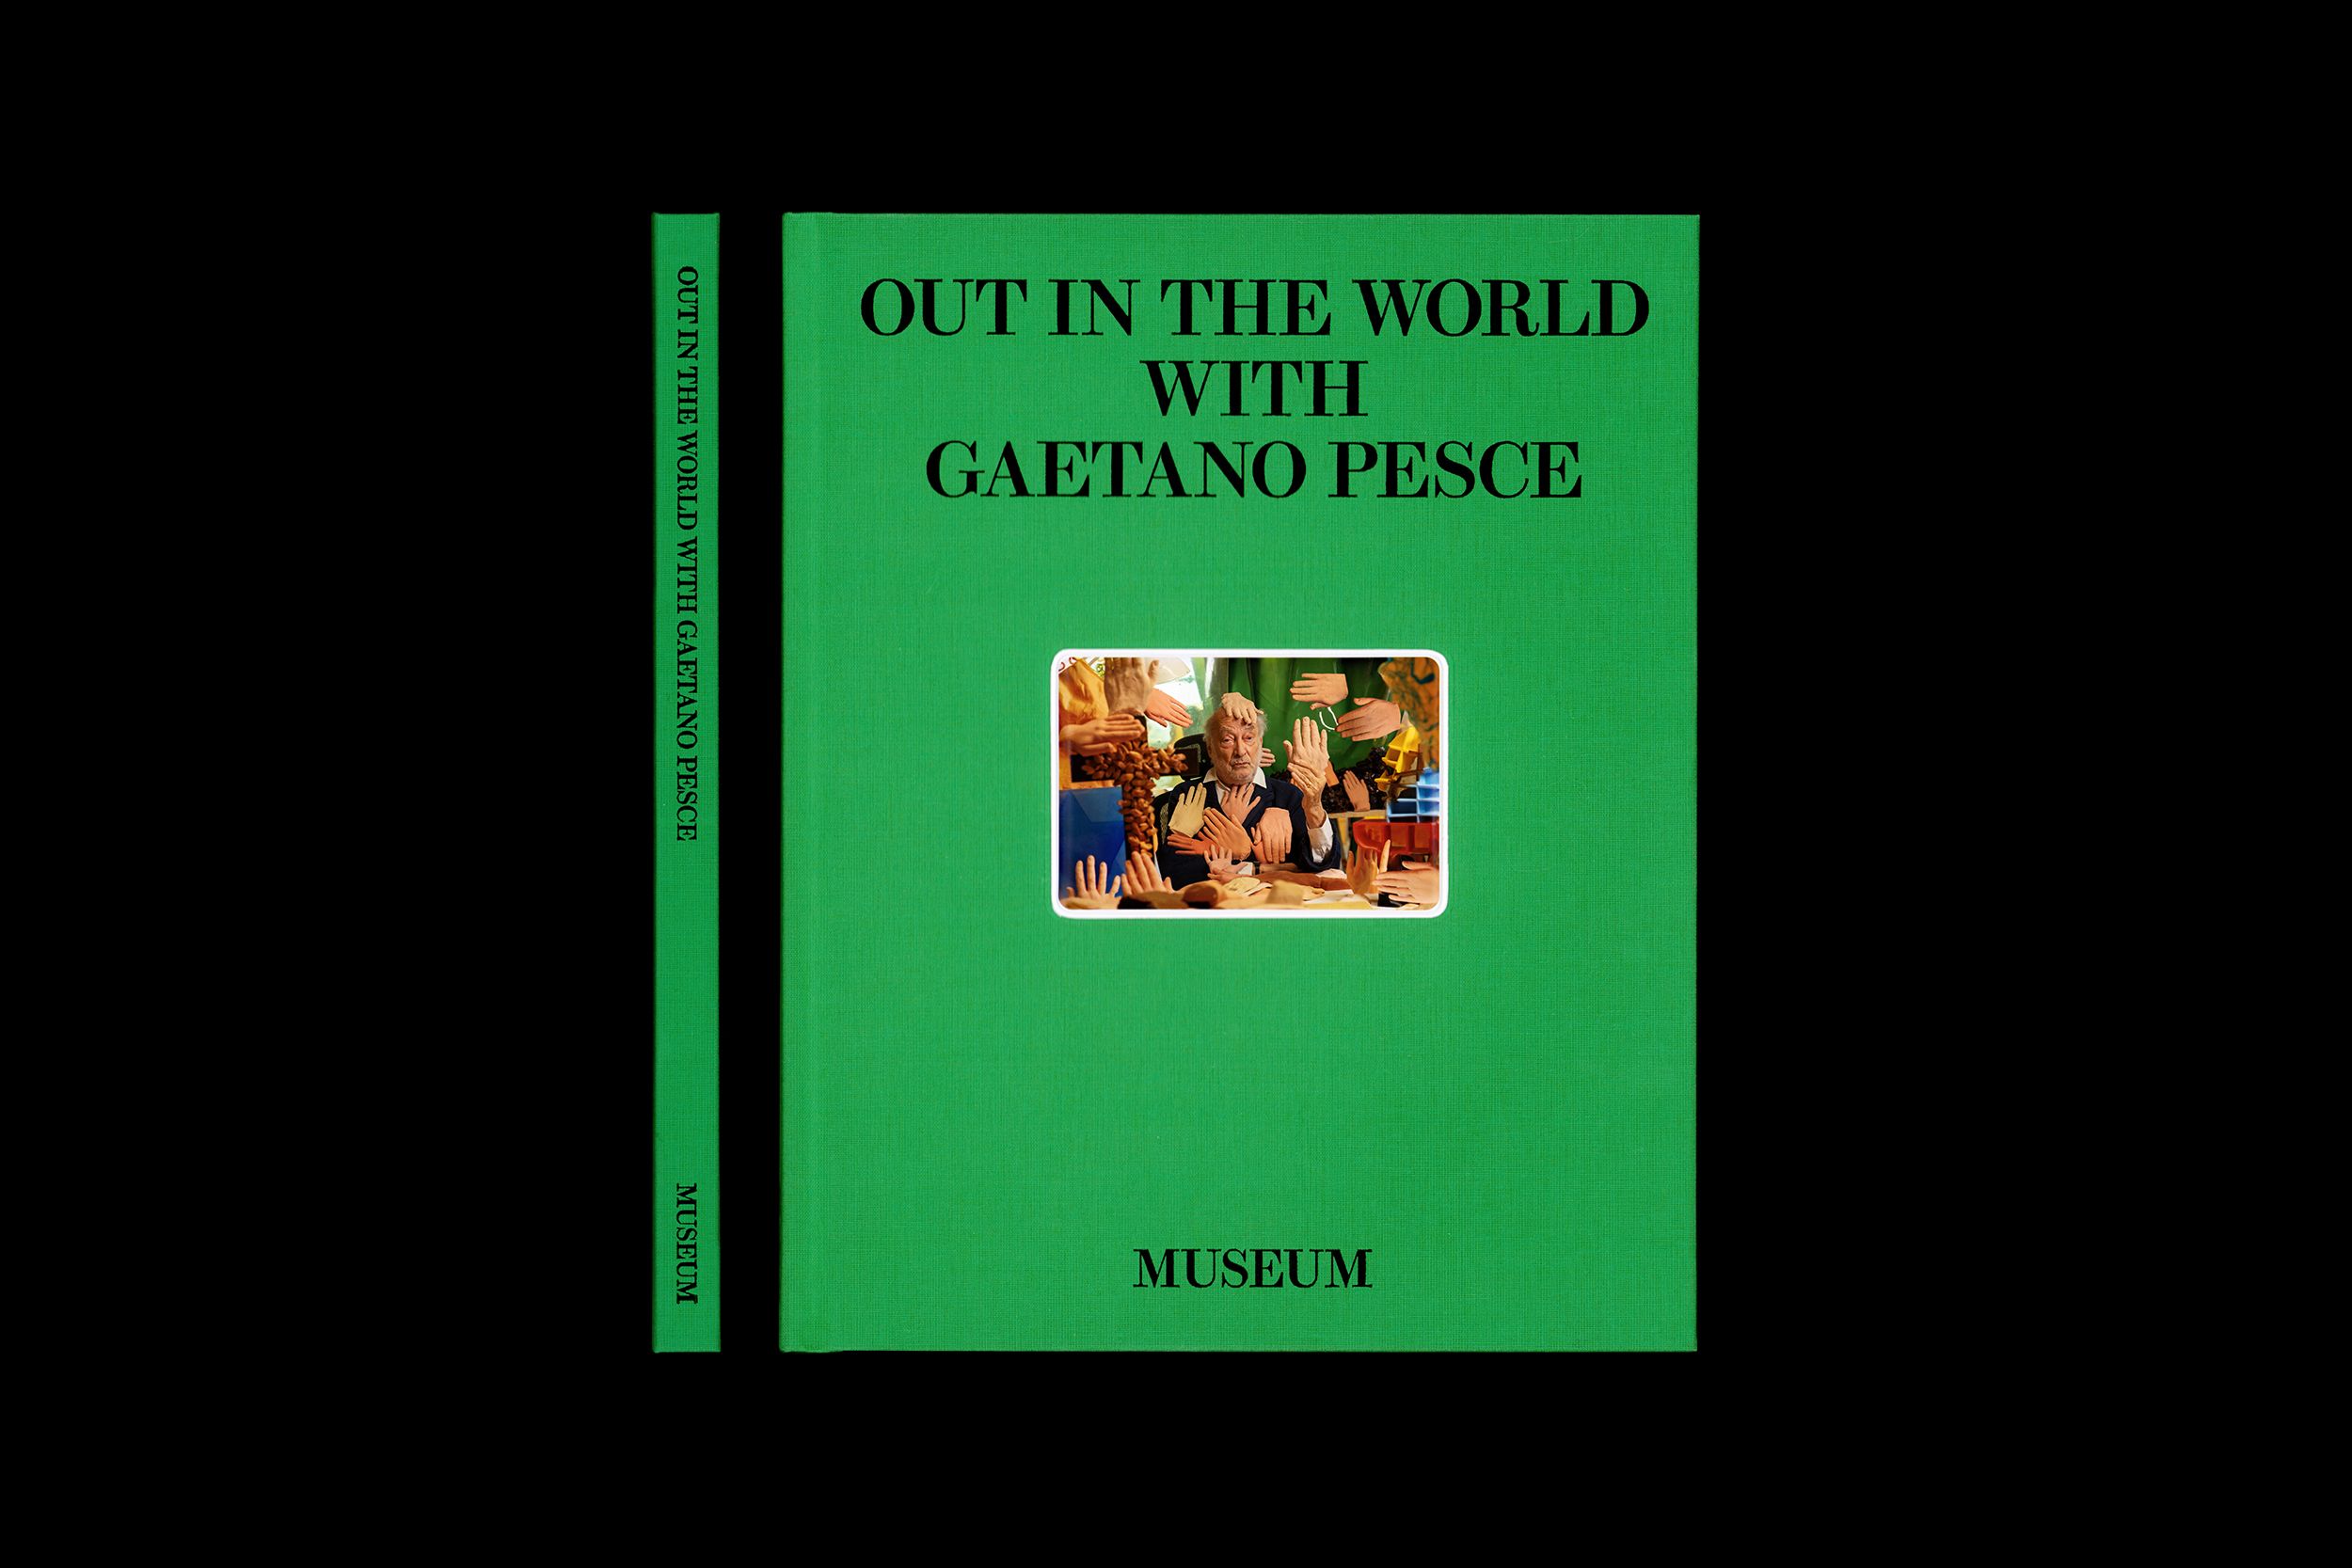 Out in the World with Gaetano Pesce